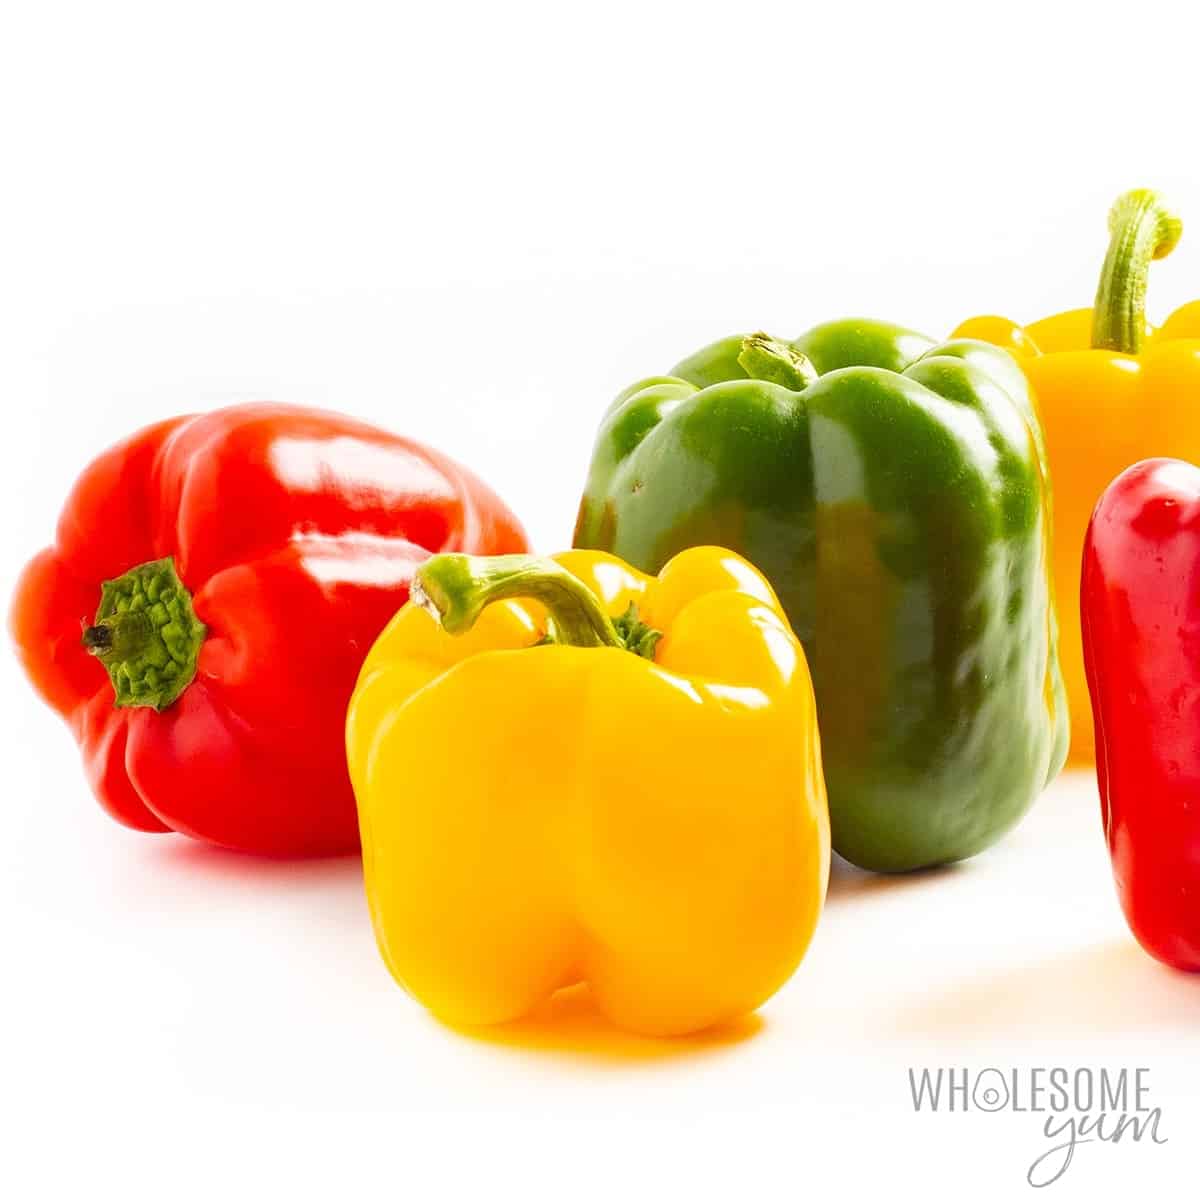 How many carbs in bell peppers? Are bell peppers keto, even? These assorted fresh bell peppers are keto friendly.